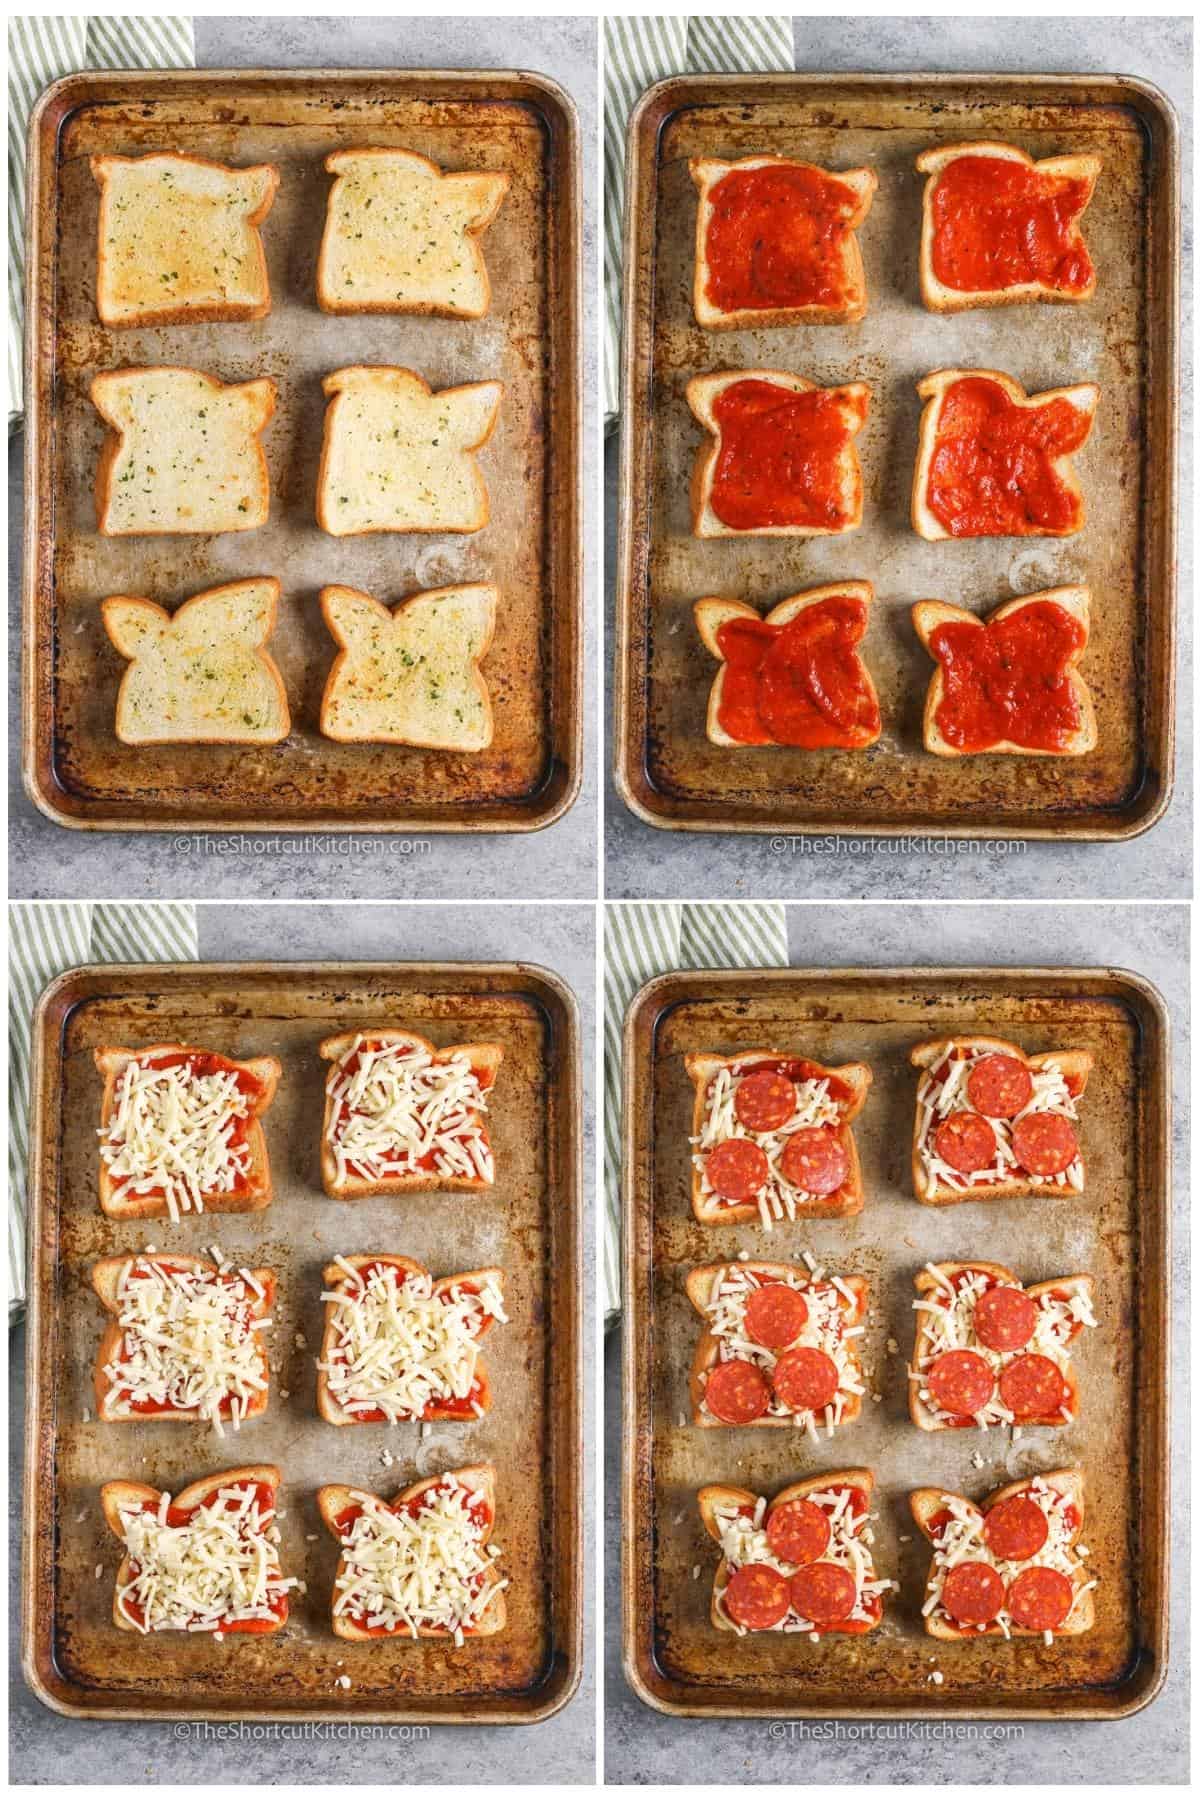 process of adding ingredients together to make Texas Toast Pizza